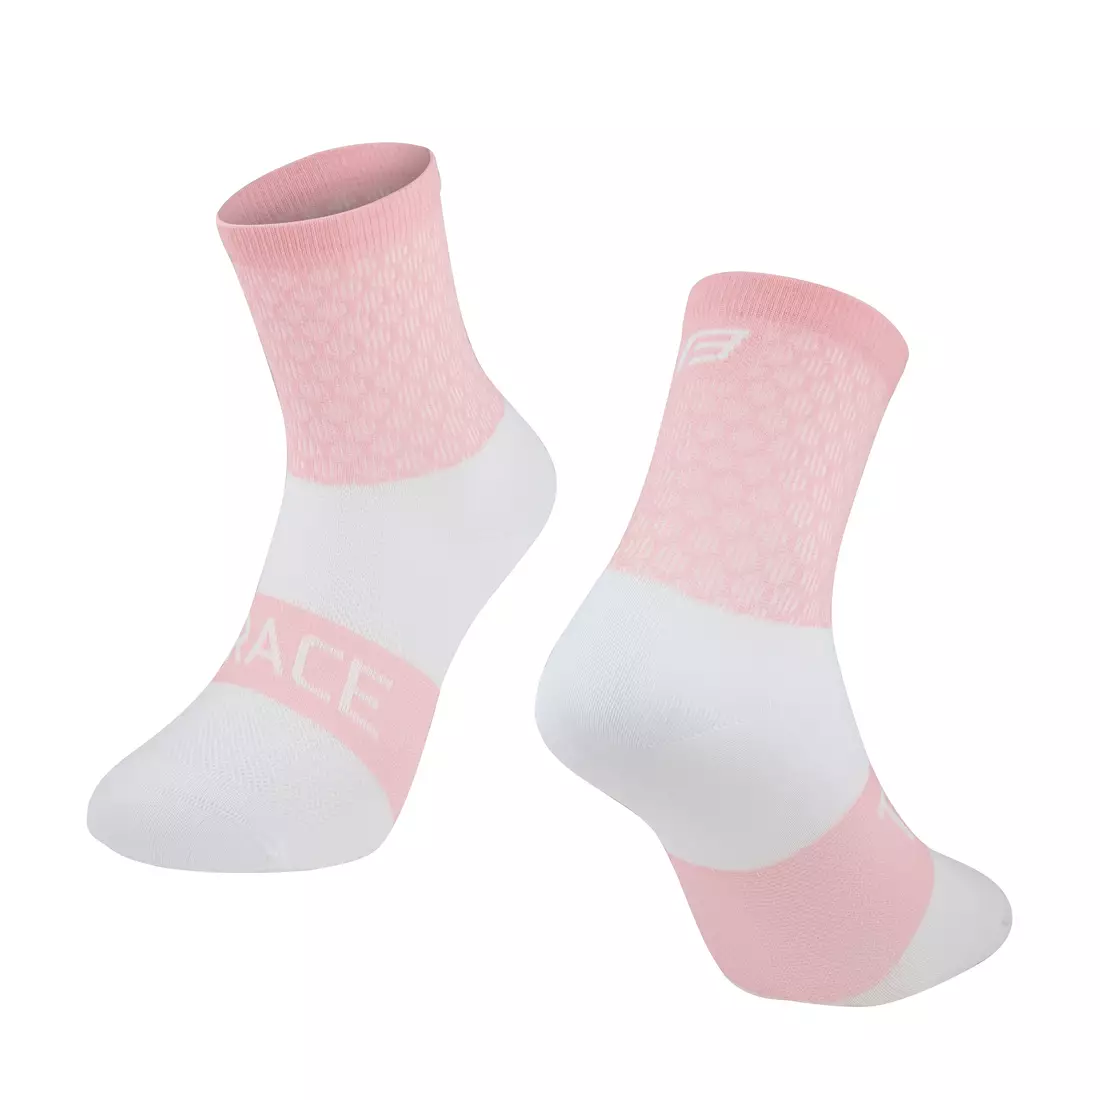 FORCE Cycling socks / sport socks TRACE, pink and white, 900894